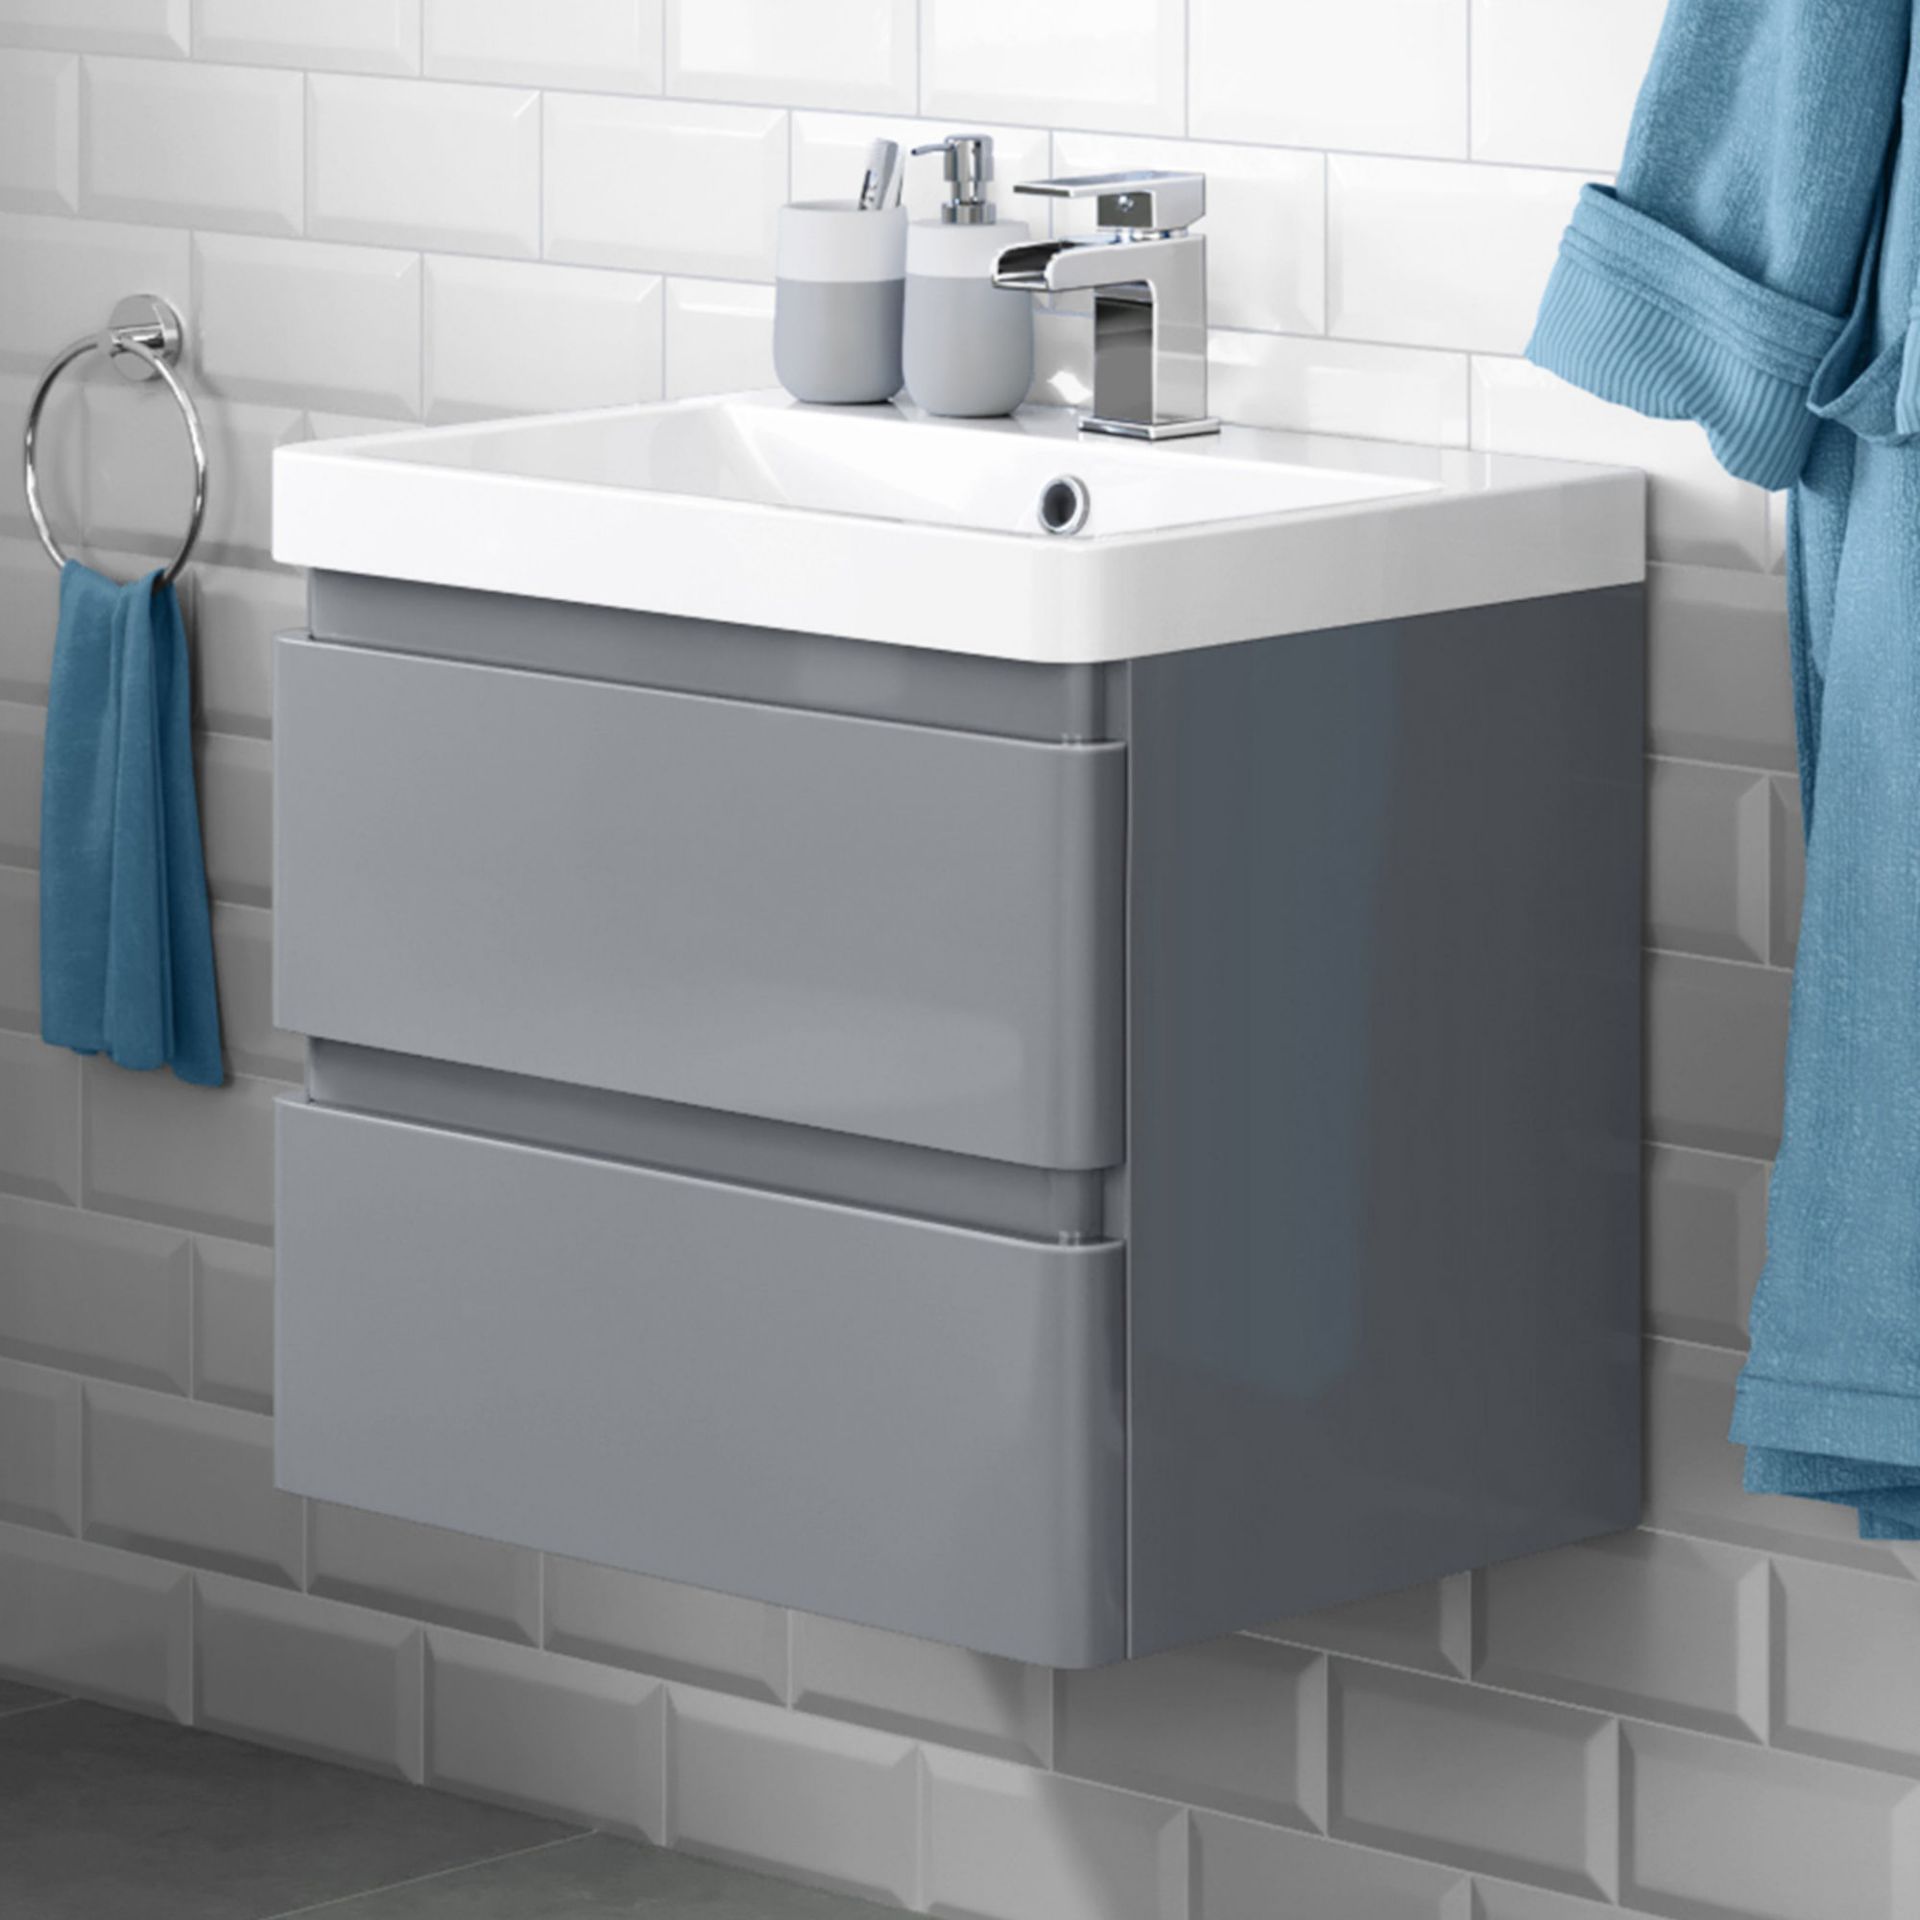 600mm Denver Gloss Grey Drawer Unit - Wall Hung. Does NOT include basin. Create a streamlined,